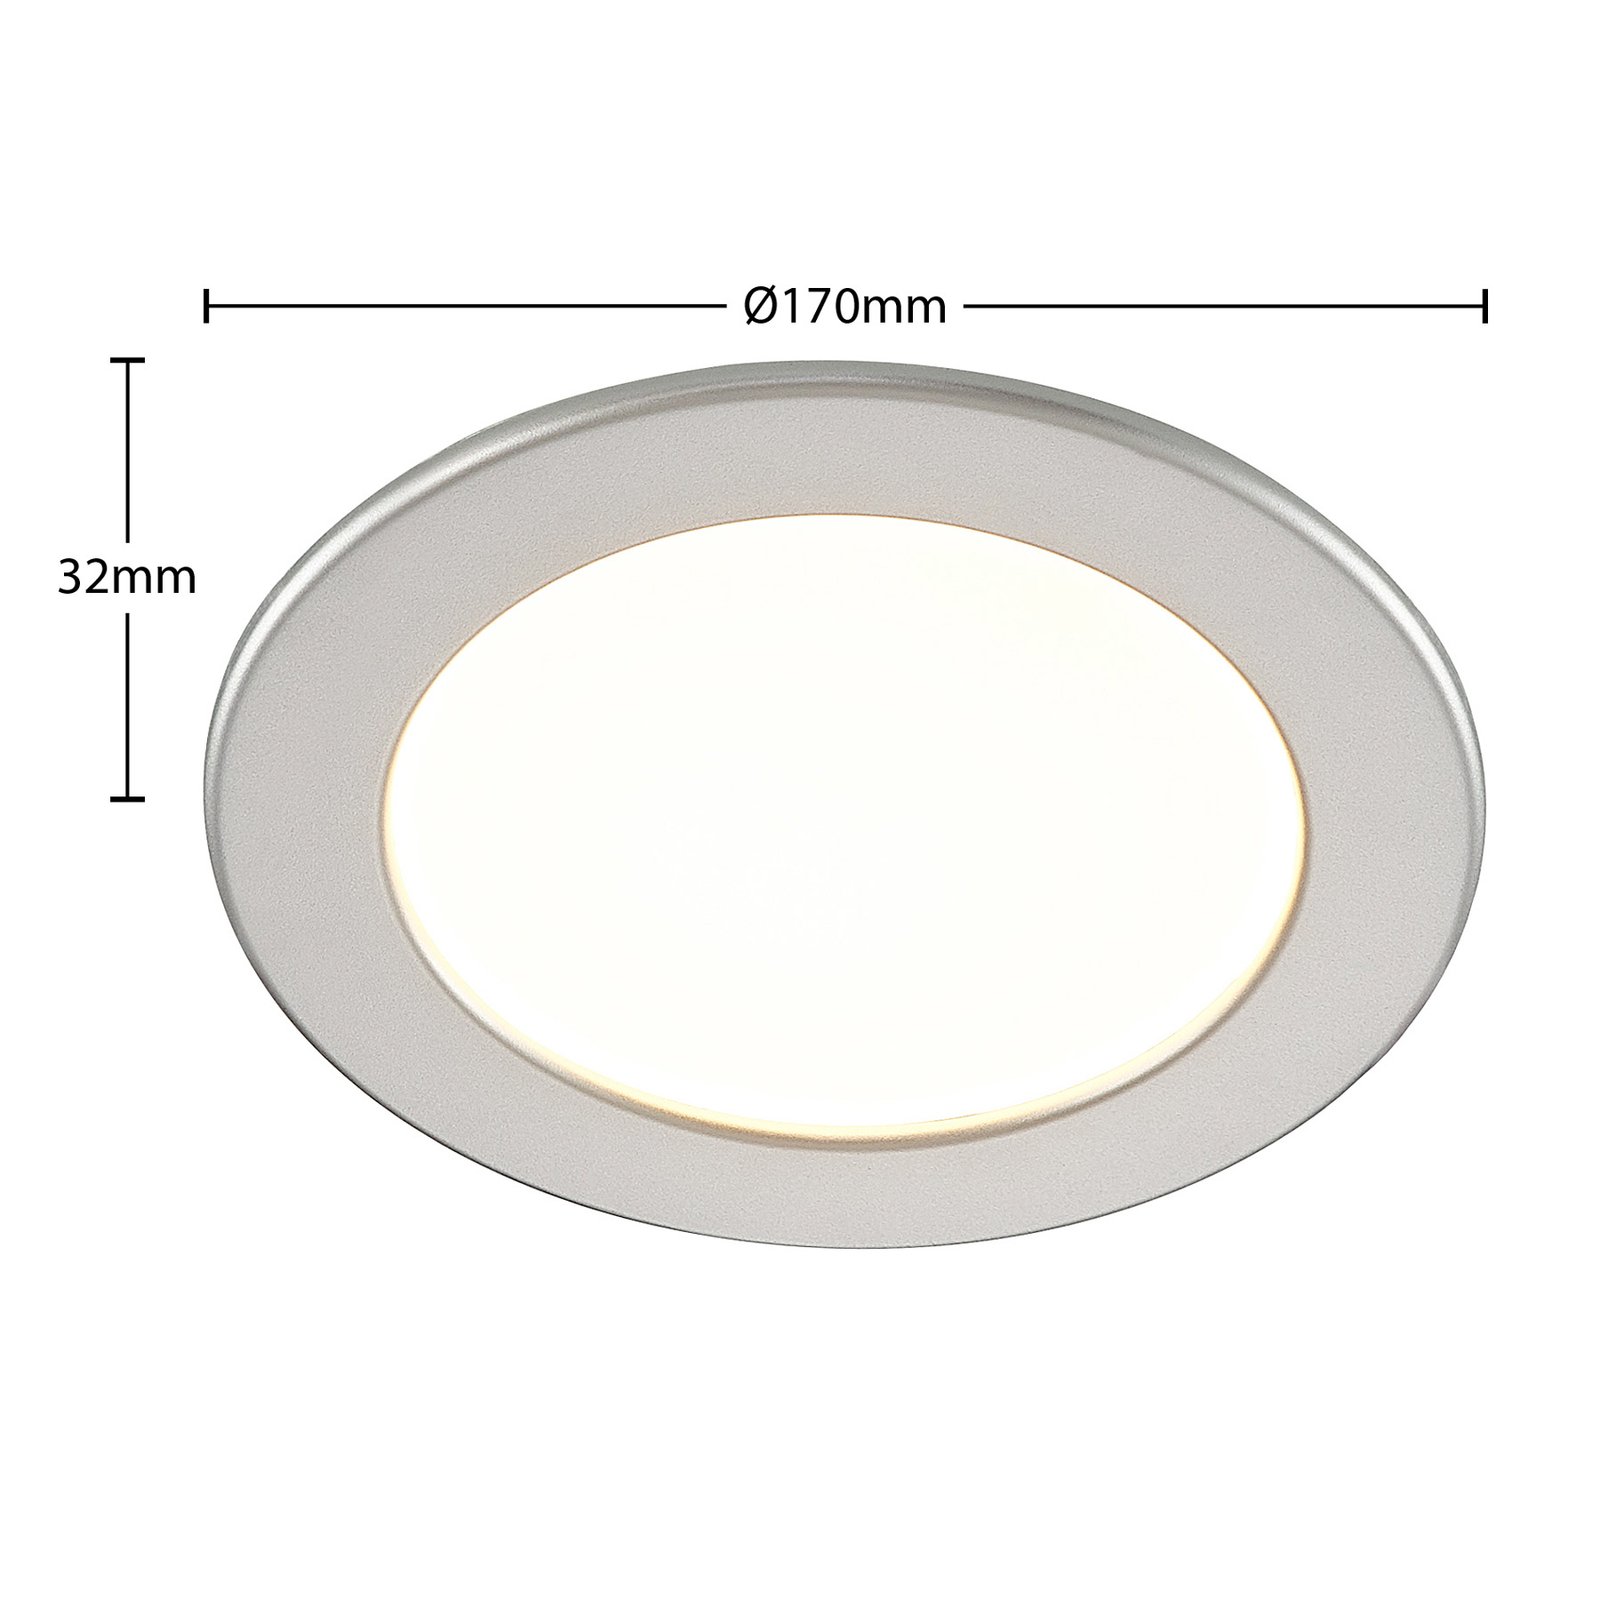 Prios LED recessed light Cadance, silver, 17 cm, dimmable